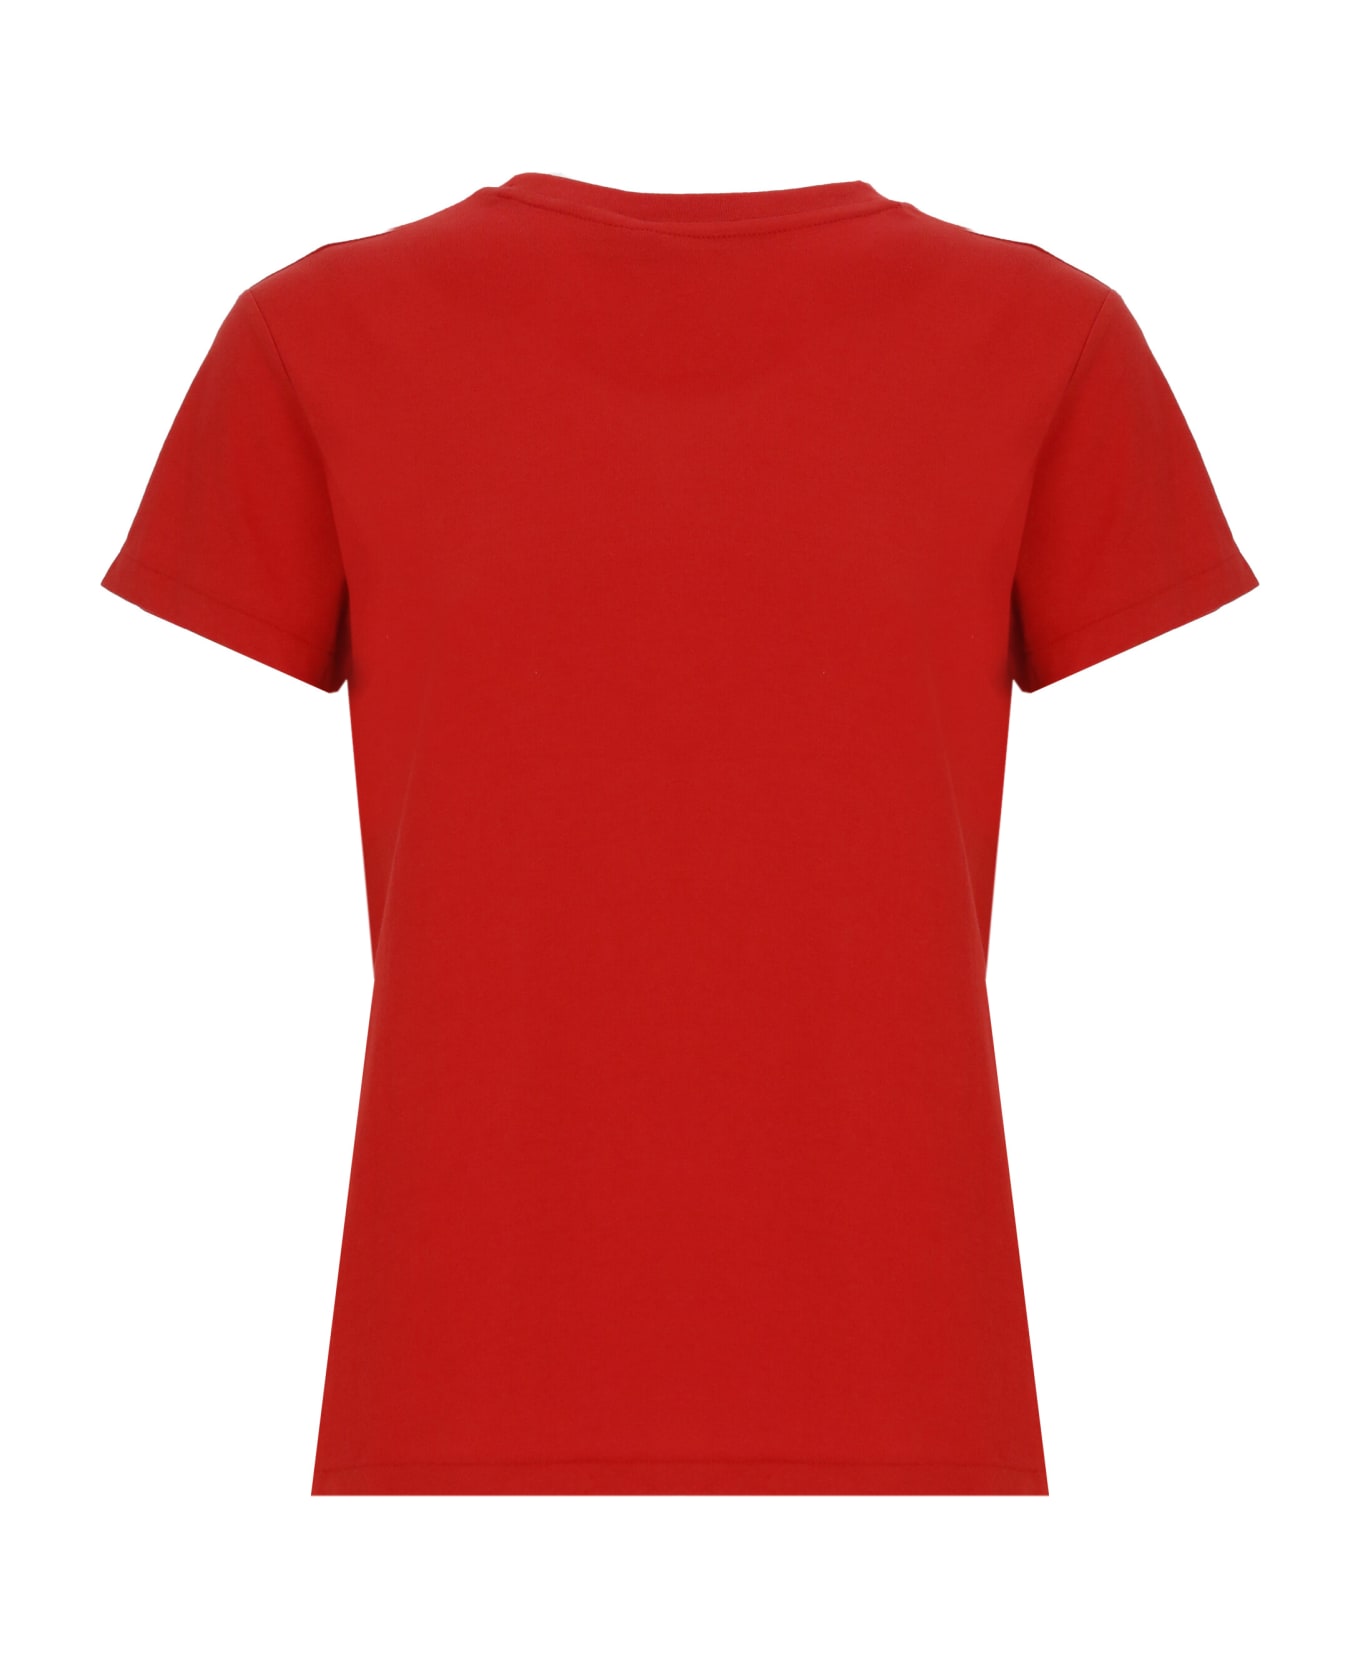 Ralph Lauren Red T-shirt With Contrasting Pony - Red